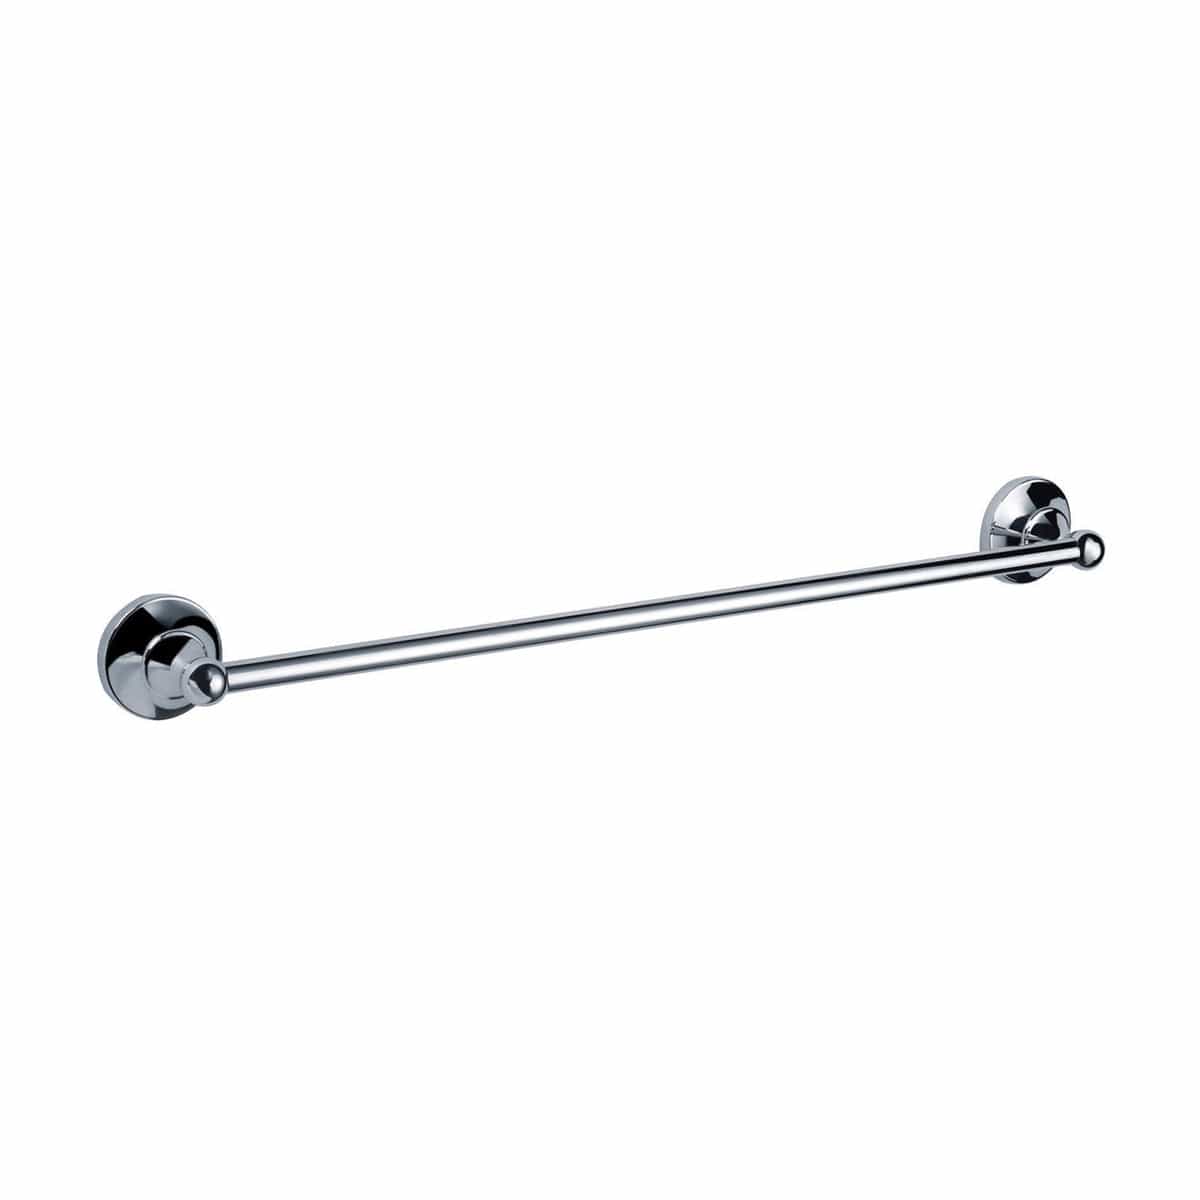 Shop Bathroom Copper Chrome Plated Single Towel Bar Rack - 7324 | Buy Online at Supply Master Accra, Ghana Bathroom Accessories Buy Tools hardware Building materials